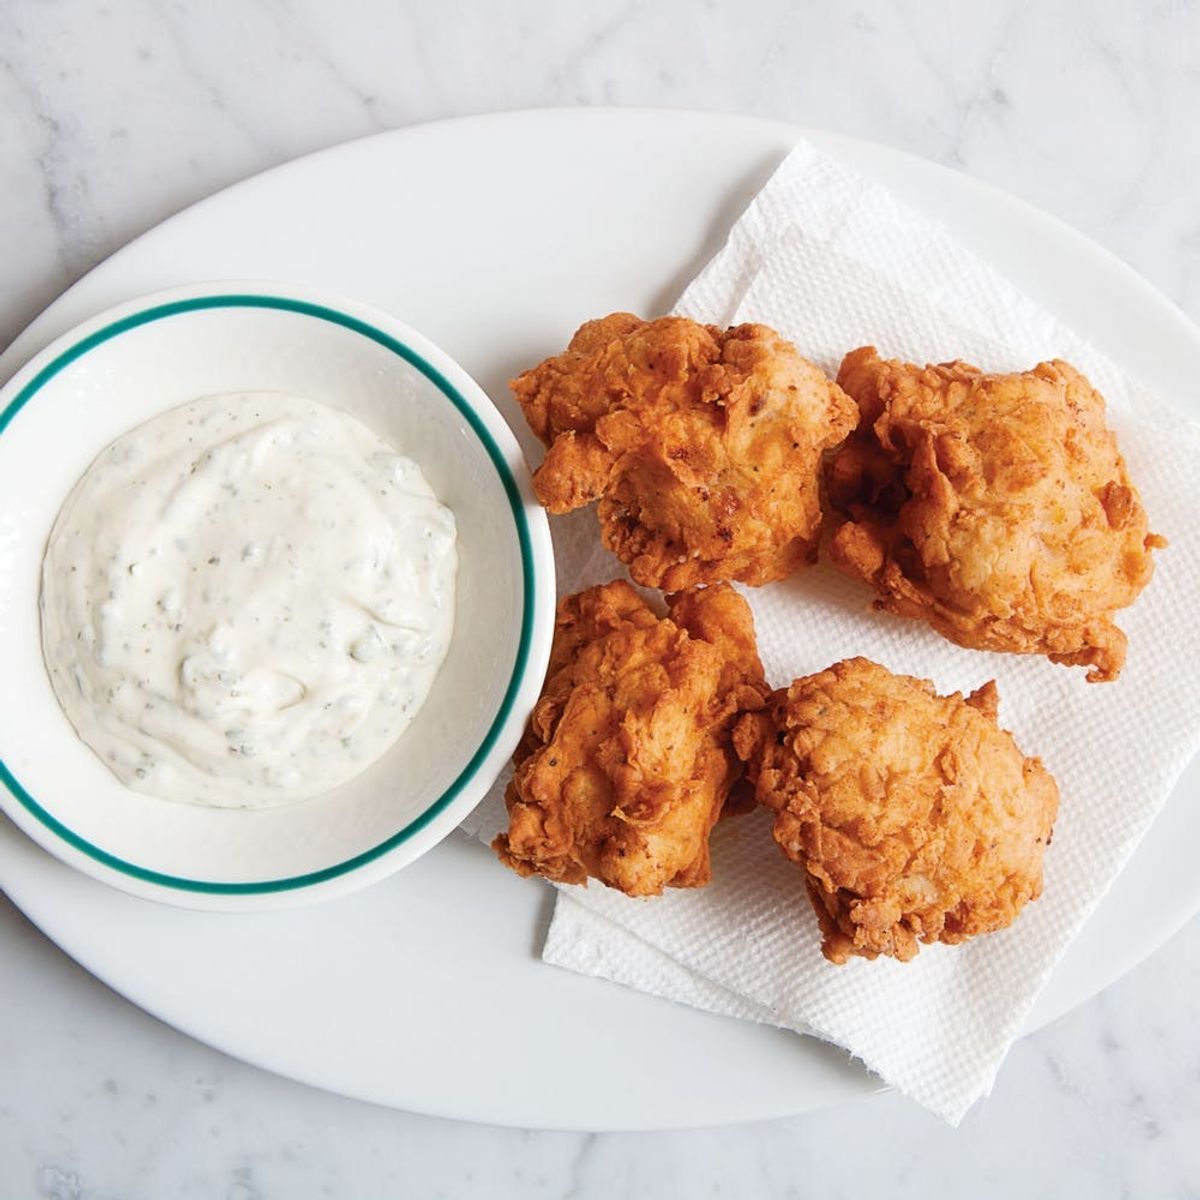 Shake Shack Has a New Cookbook — and This Chicken Bites Recipe Will Have You *Running* to Buy It